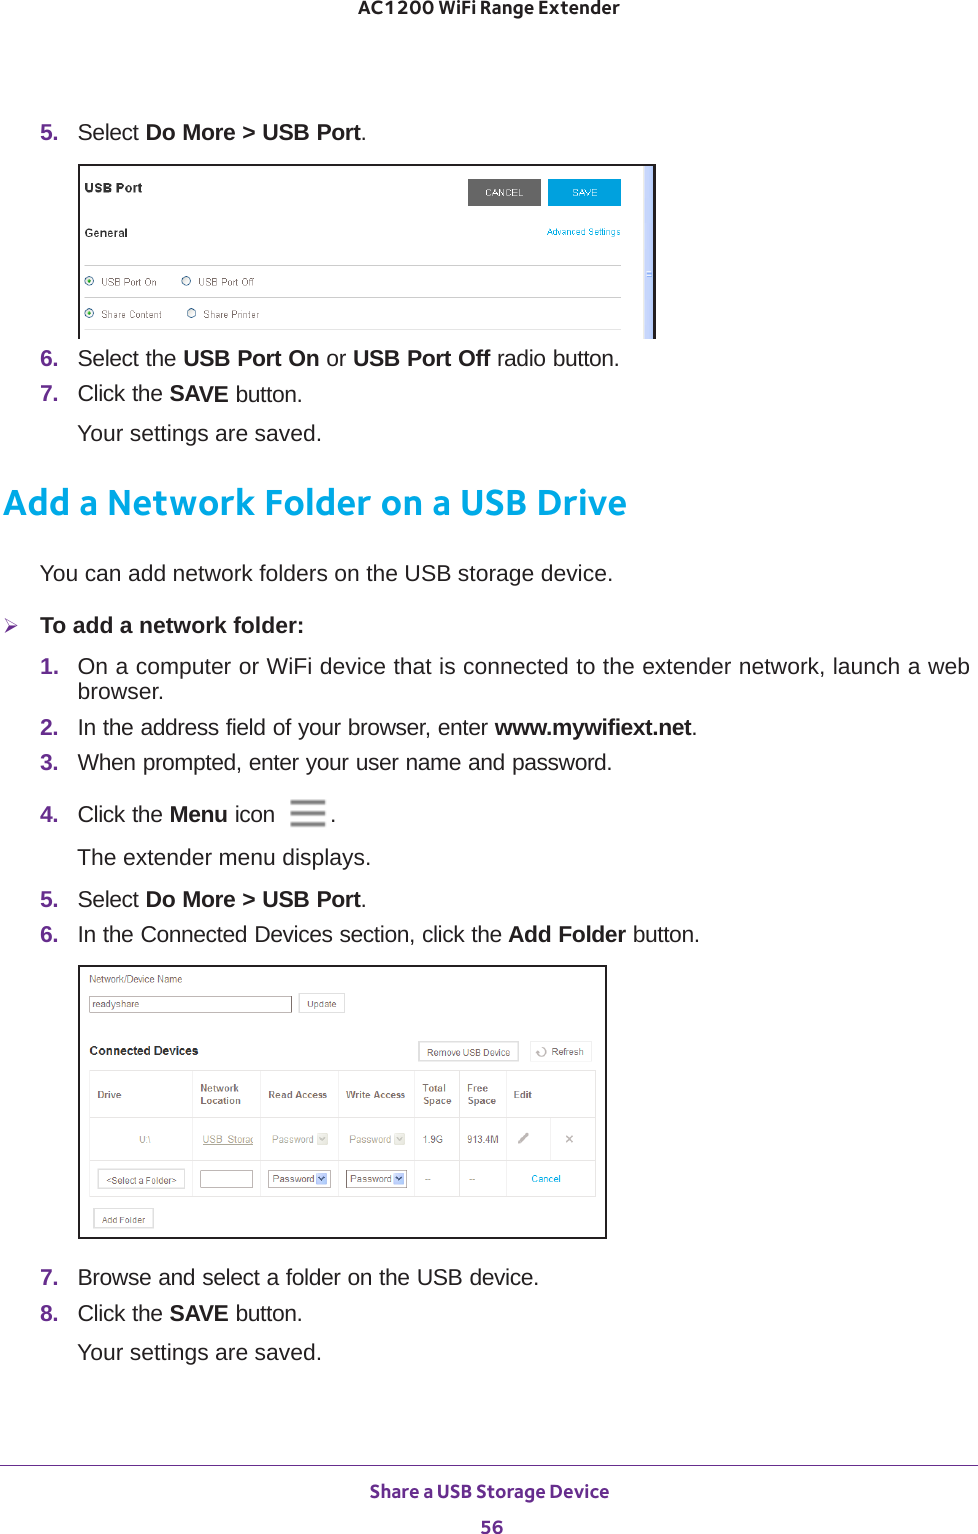 Share a USB Storage Device 56AC1200 WiFi Range Extender 5.  Select Do More &gt; USB Port.6.  Select the USB Port On or USB Port Off radio button.7.  Click the SAVE button.Your settings are saved.Add a Network Folder on a USB DriveYou can add network folders on the USB storage device.To add a network folder:1.  On a computer or WiFi device that is connected to the extender network, launch a web browser. 2.  In the address field of your browser, enter www.mywifiext.net. 3.  When prompted, enter your user name and password.4.  Click the Menu icon  .The extender menu displays.5.  Select Do More &gt; USB Port.6.  In the Connected Devices section, click the Add Folder button.7.  Browse and select a folder on the USB device.8.  Click the SAVE button.Your settings are saved.